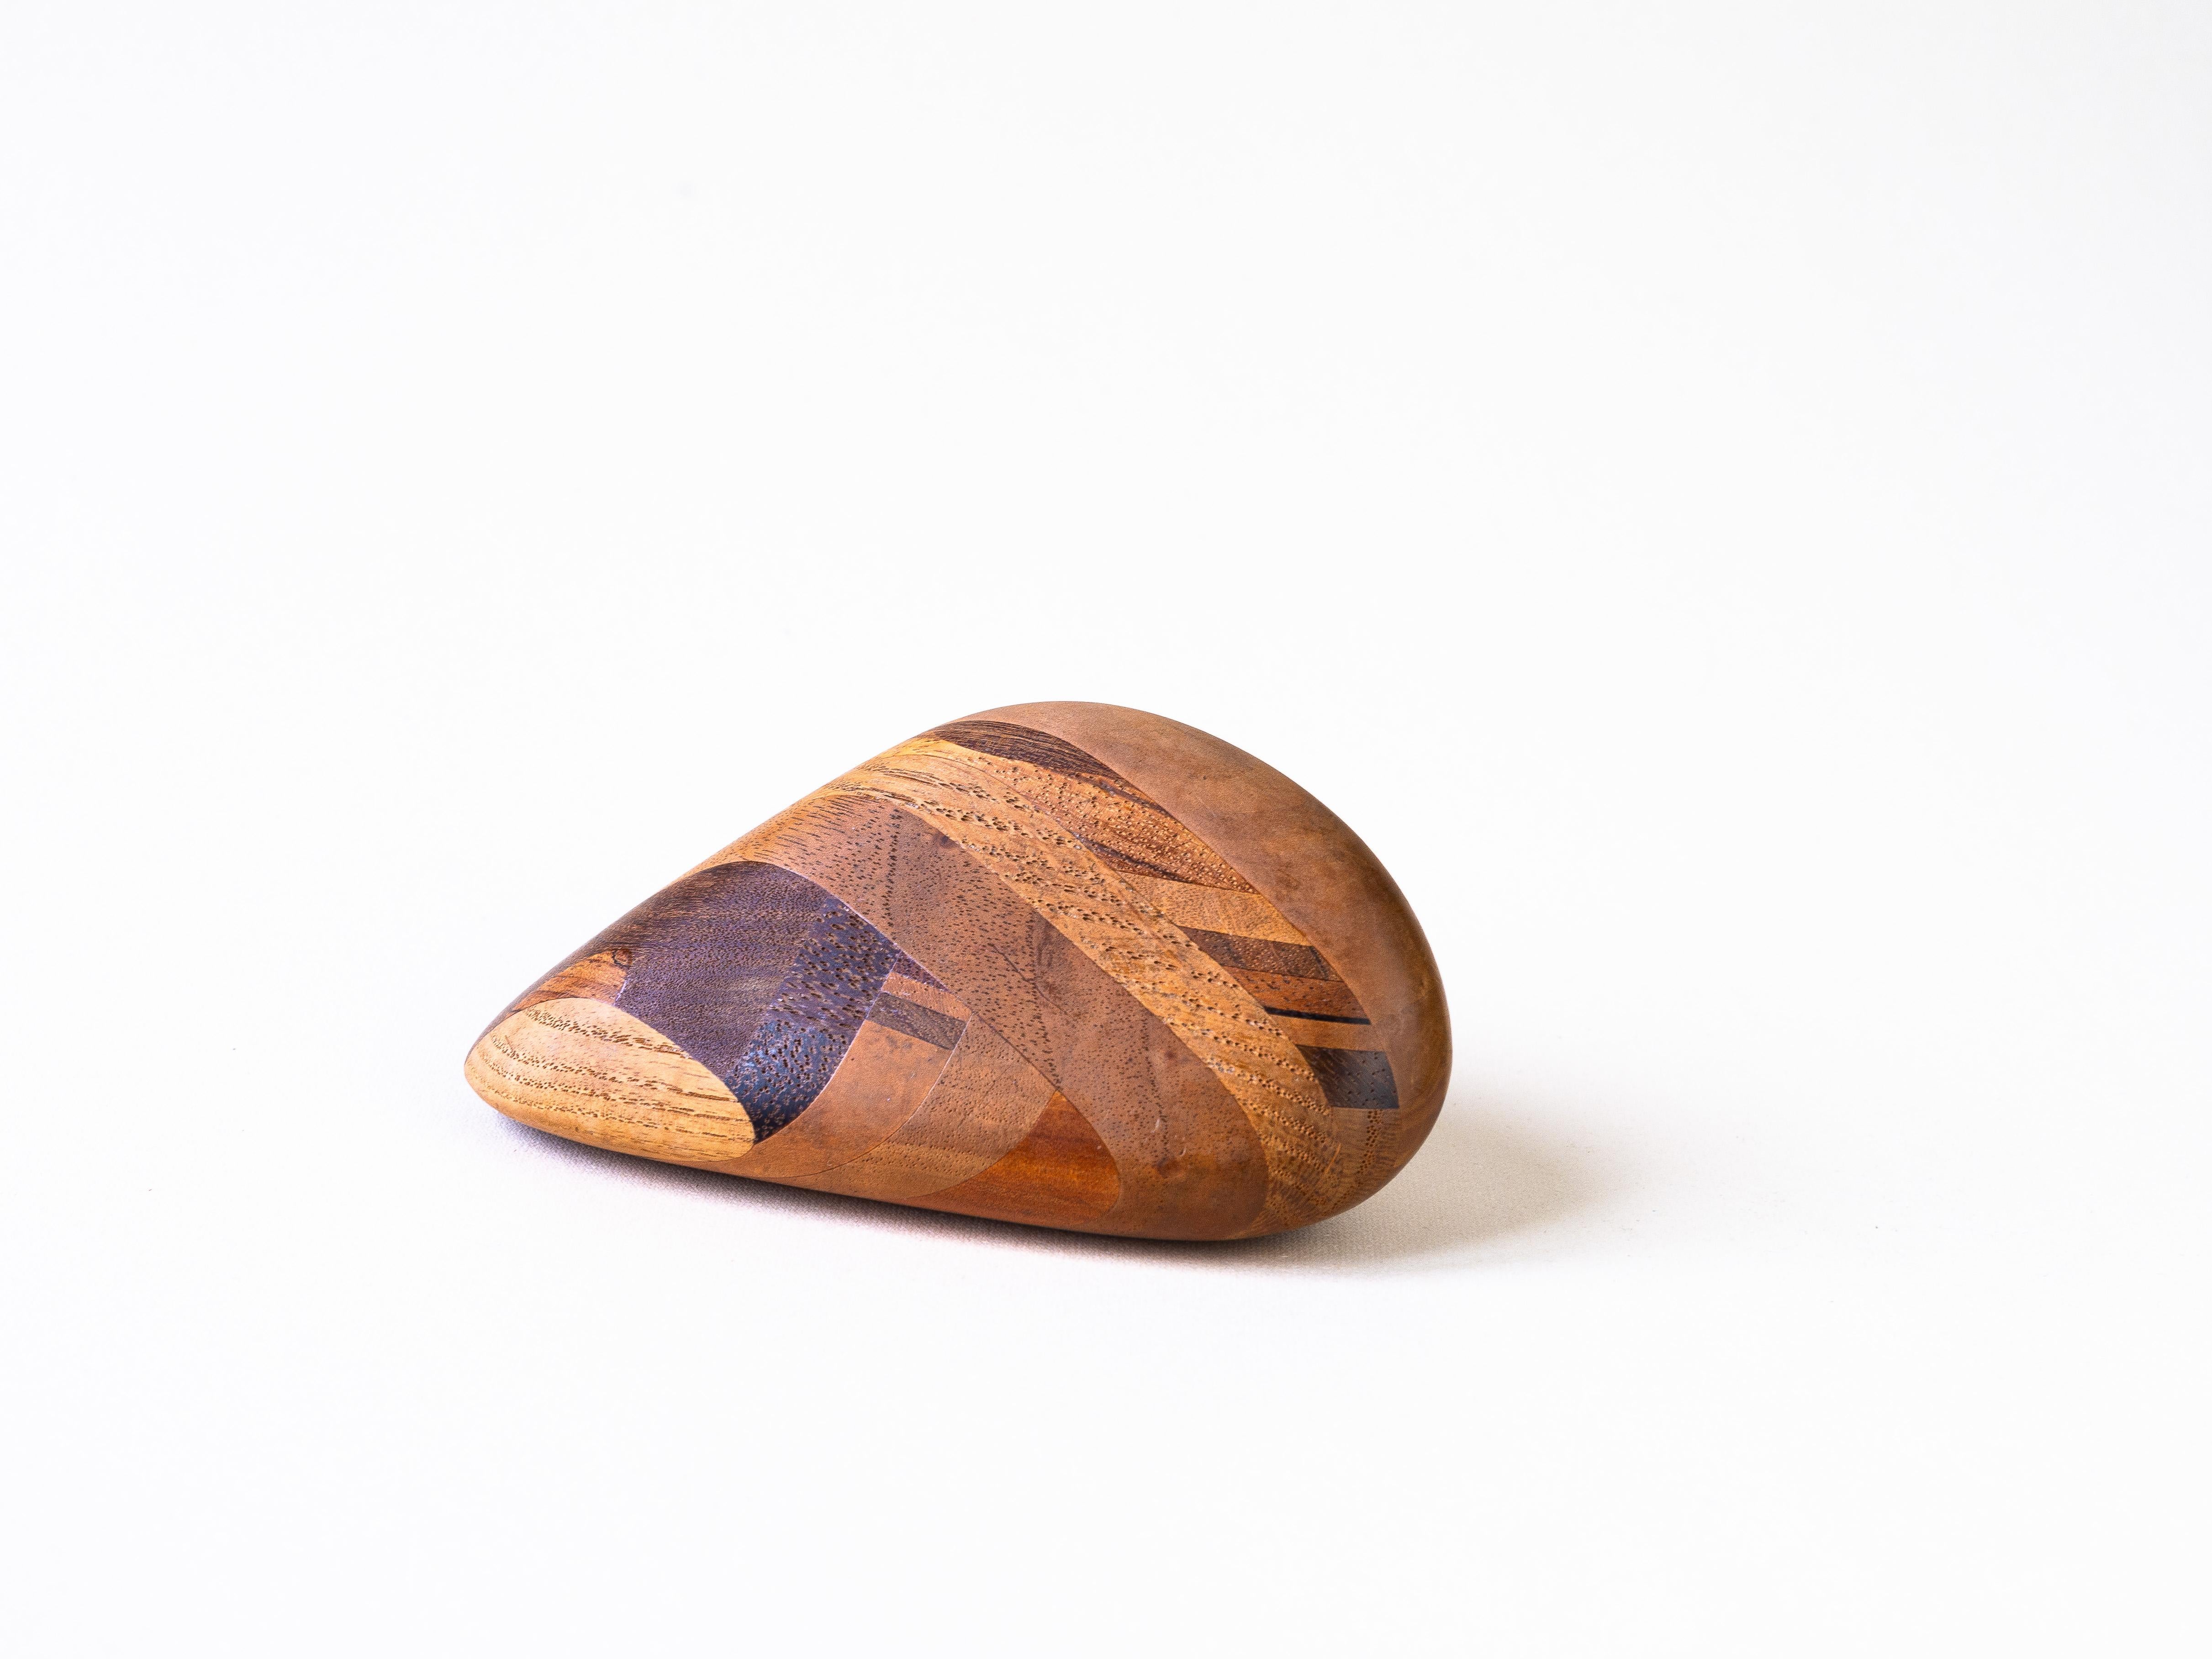 Sculpture Wooden Pebble, 1970s Desk Accessory, Marquetry Paperweight For Sale 3